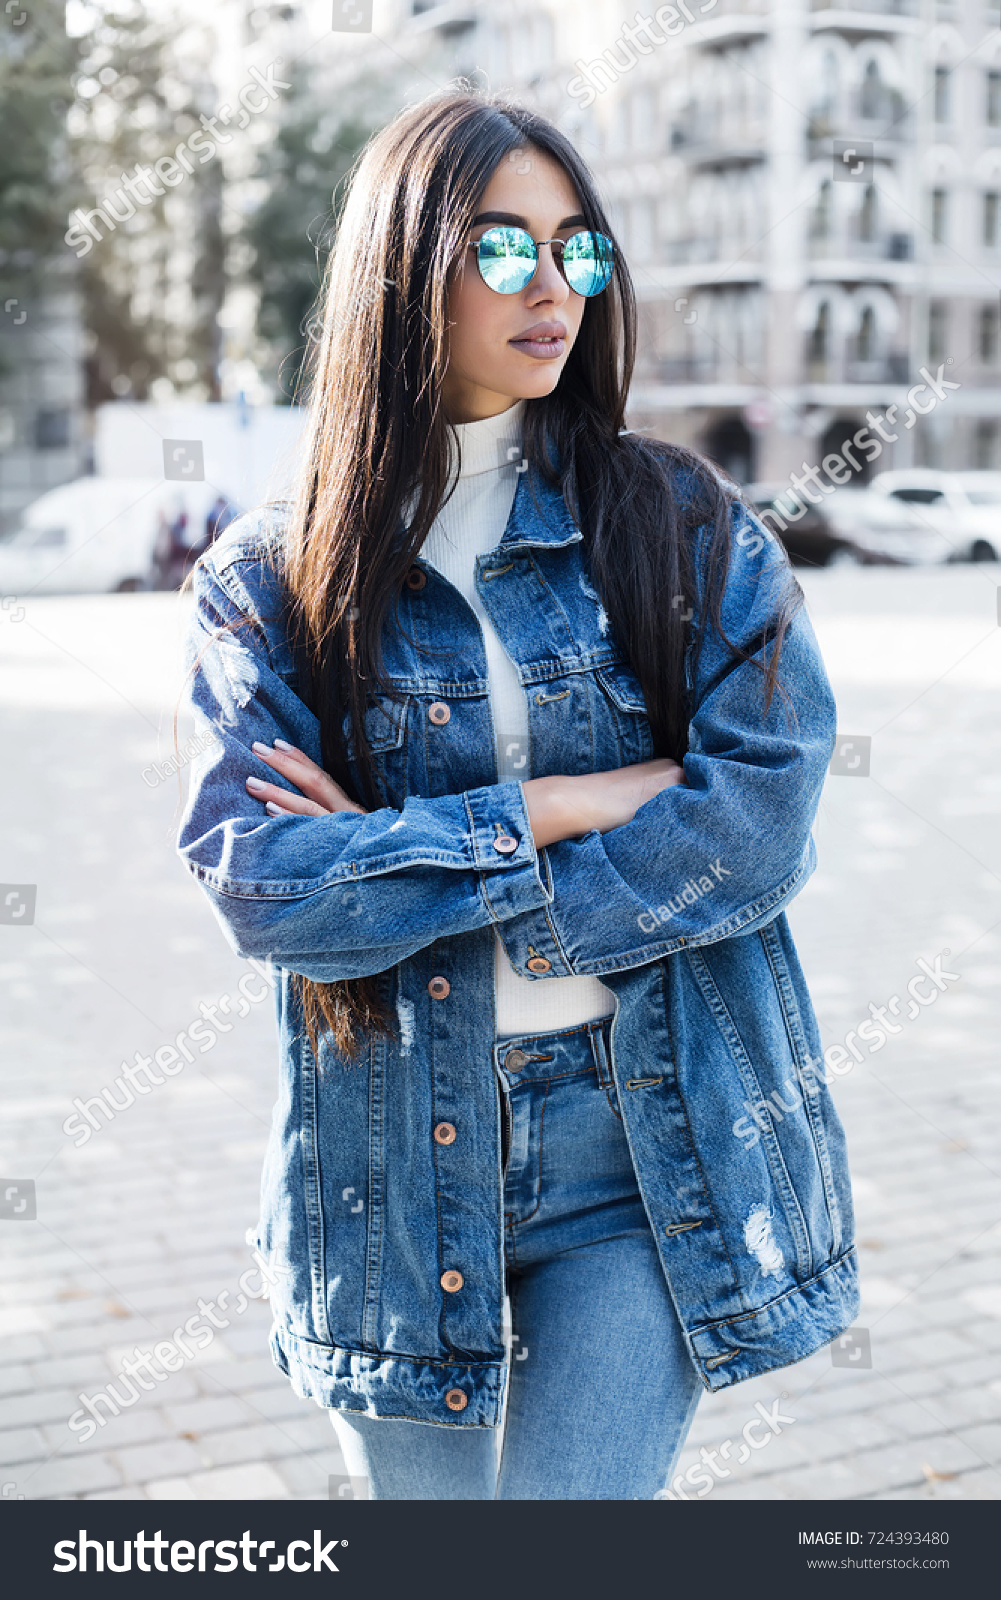 tension archive Wrongdoing Hipster Girl Wearing Blank Gray Tshirt Stock Photo 724393480 | Shutterstock